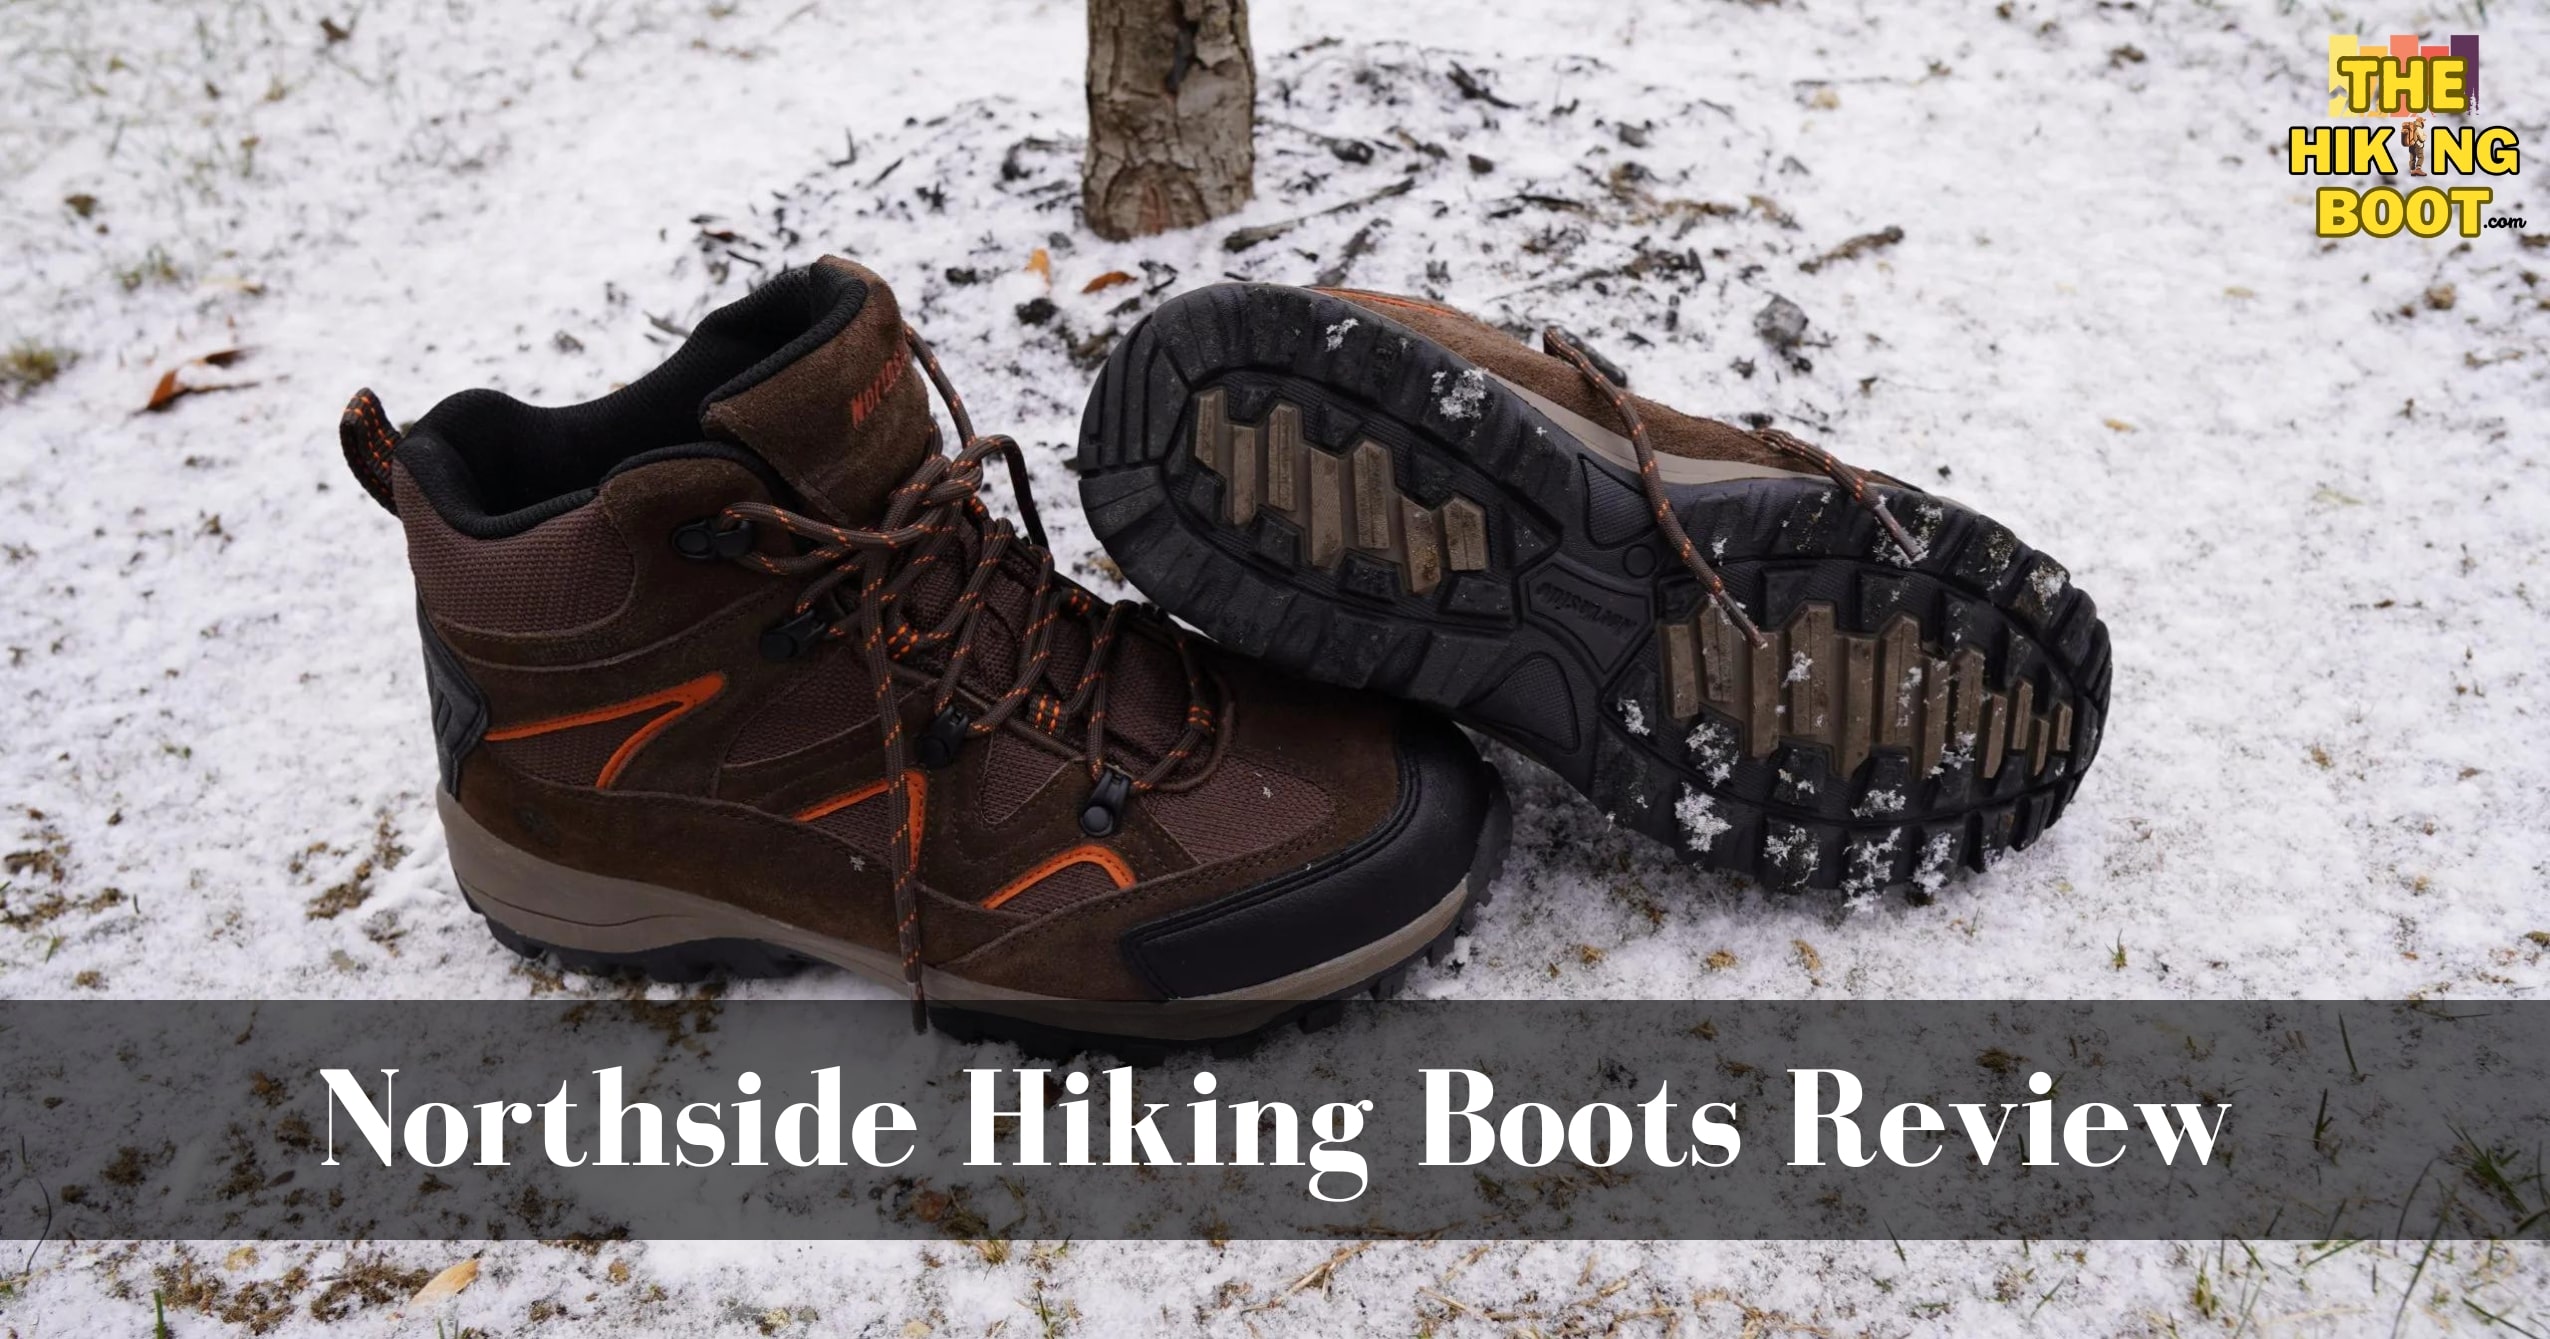 Top 3 Best Northside Hiking Boots Review – What Makes Them Special